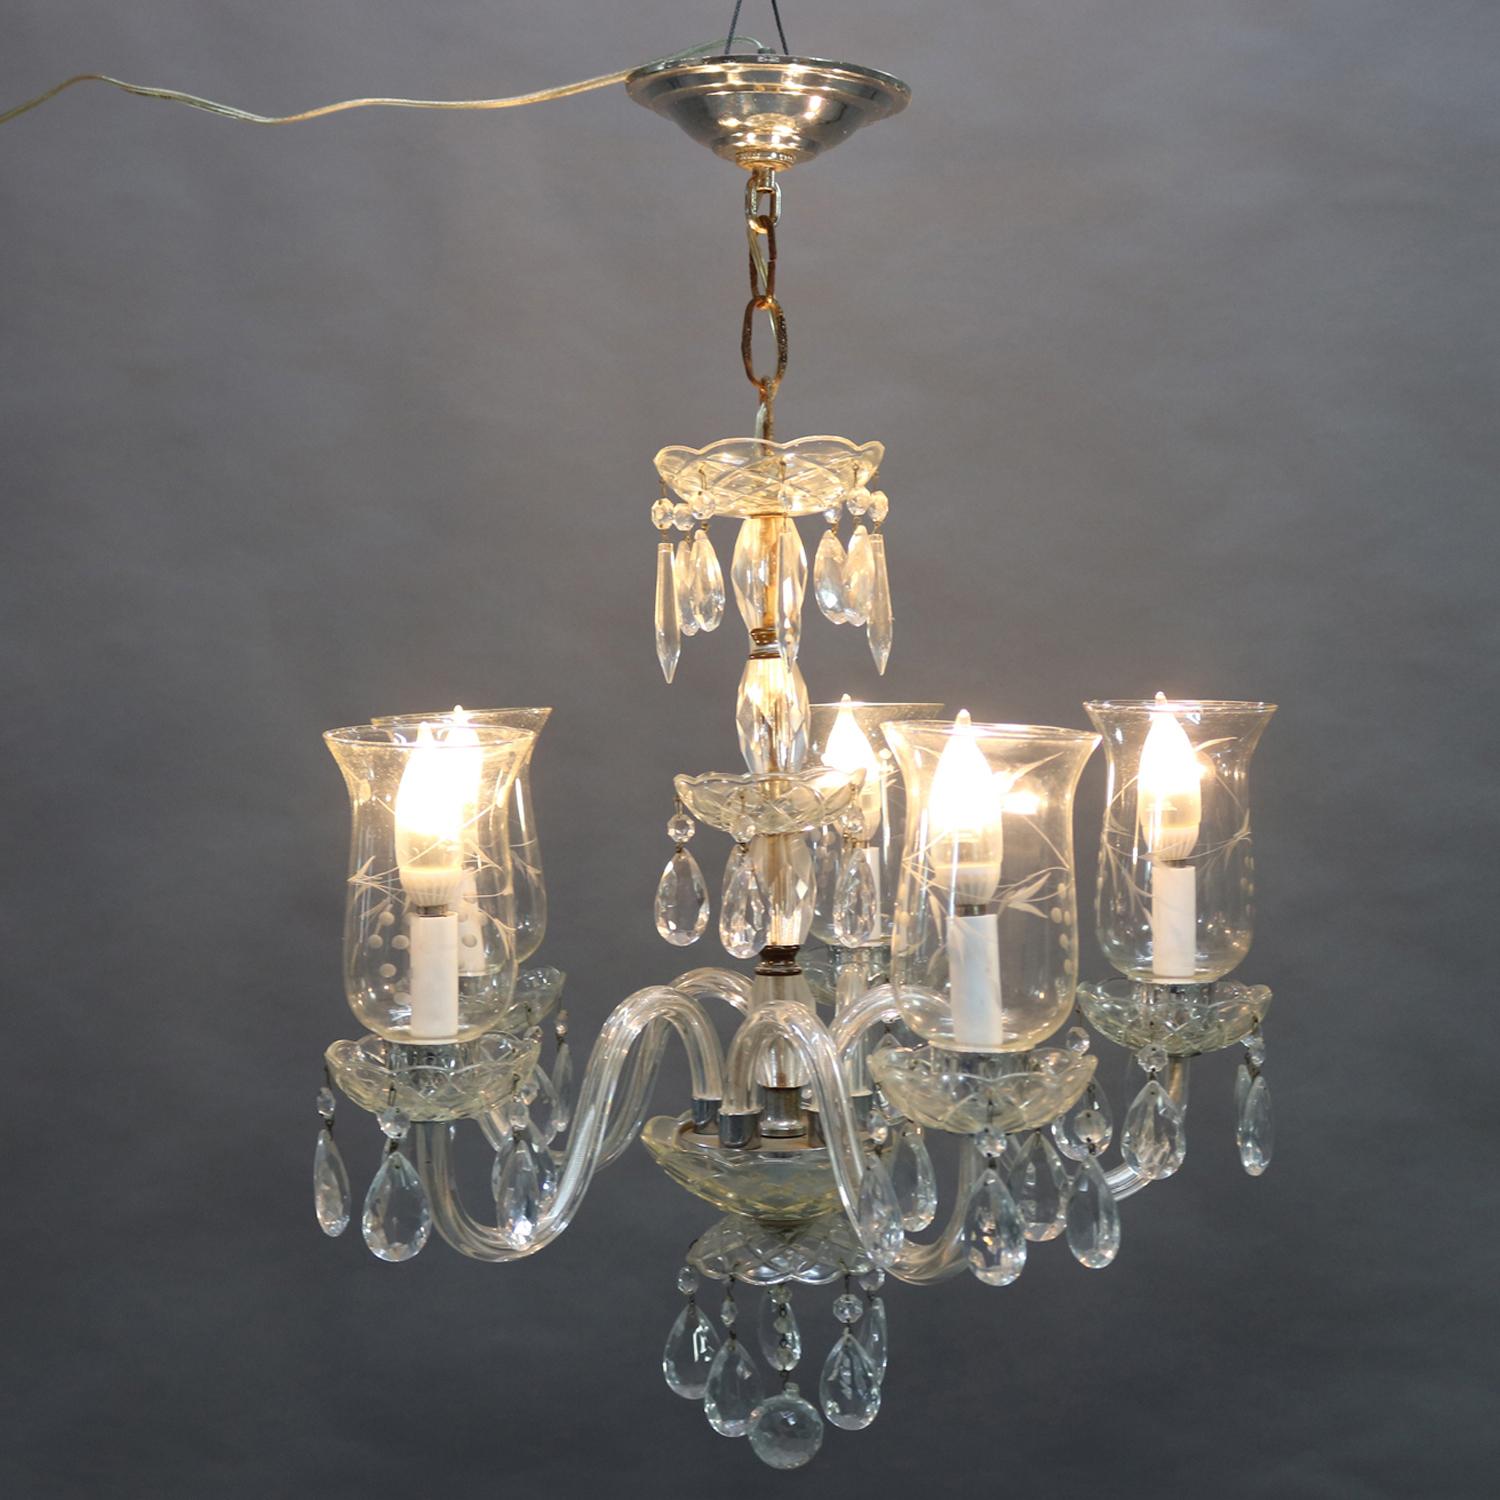 Vintage French chandelier features chrome frame with central crystal column having five s-scroll glass arms terminating in candle lights with cut-glass shades, rock and strung crystal highlights throughout, circa 1940.

***DELIVERY NOTICE – Due to